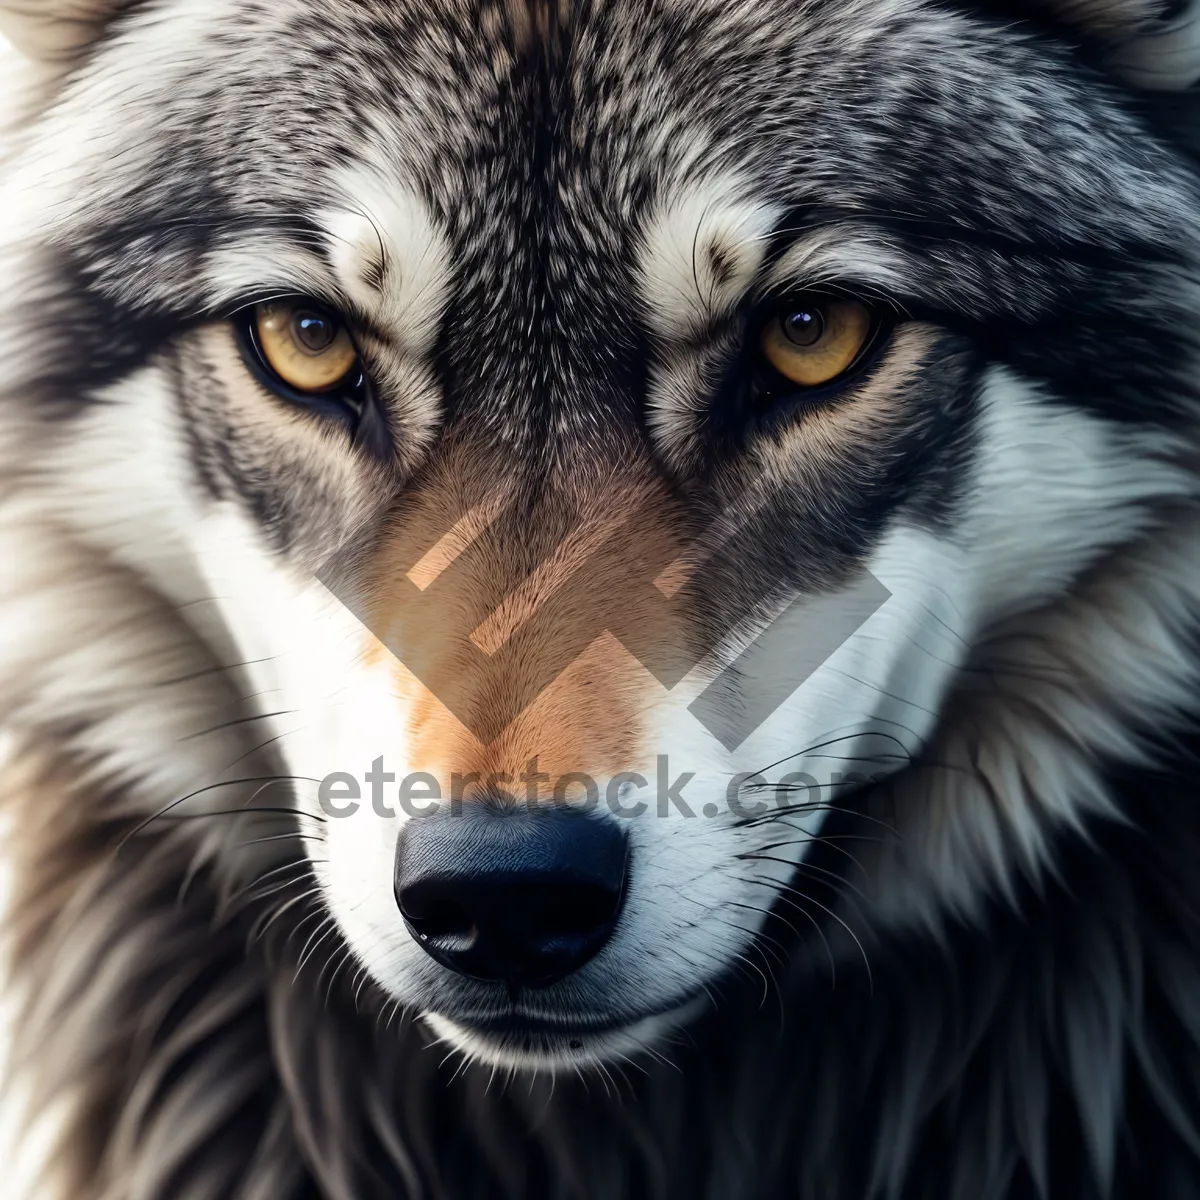 Picture of Fierce Canine Gaze: Magnificent Timber Wolf with Intense Eyes